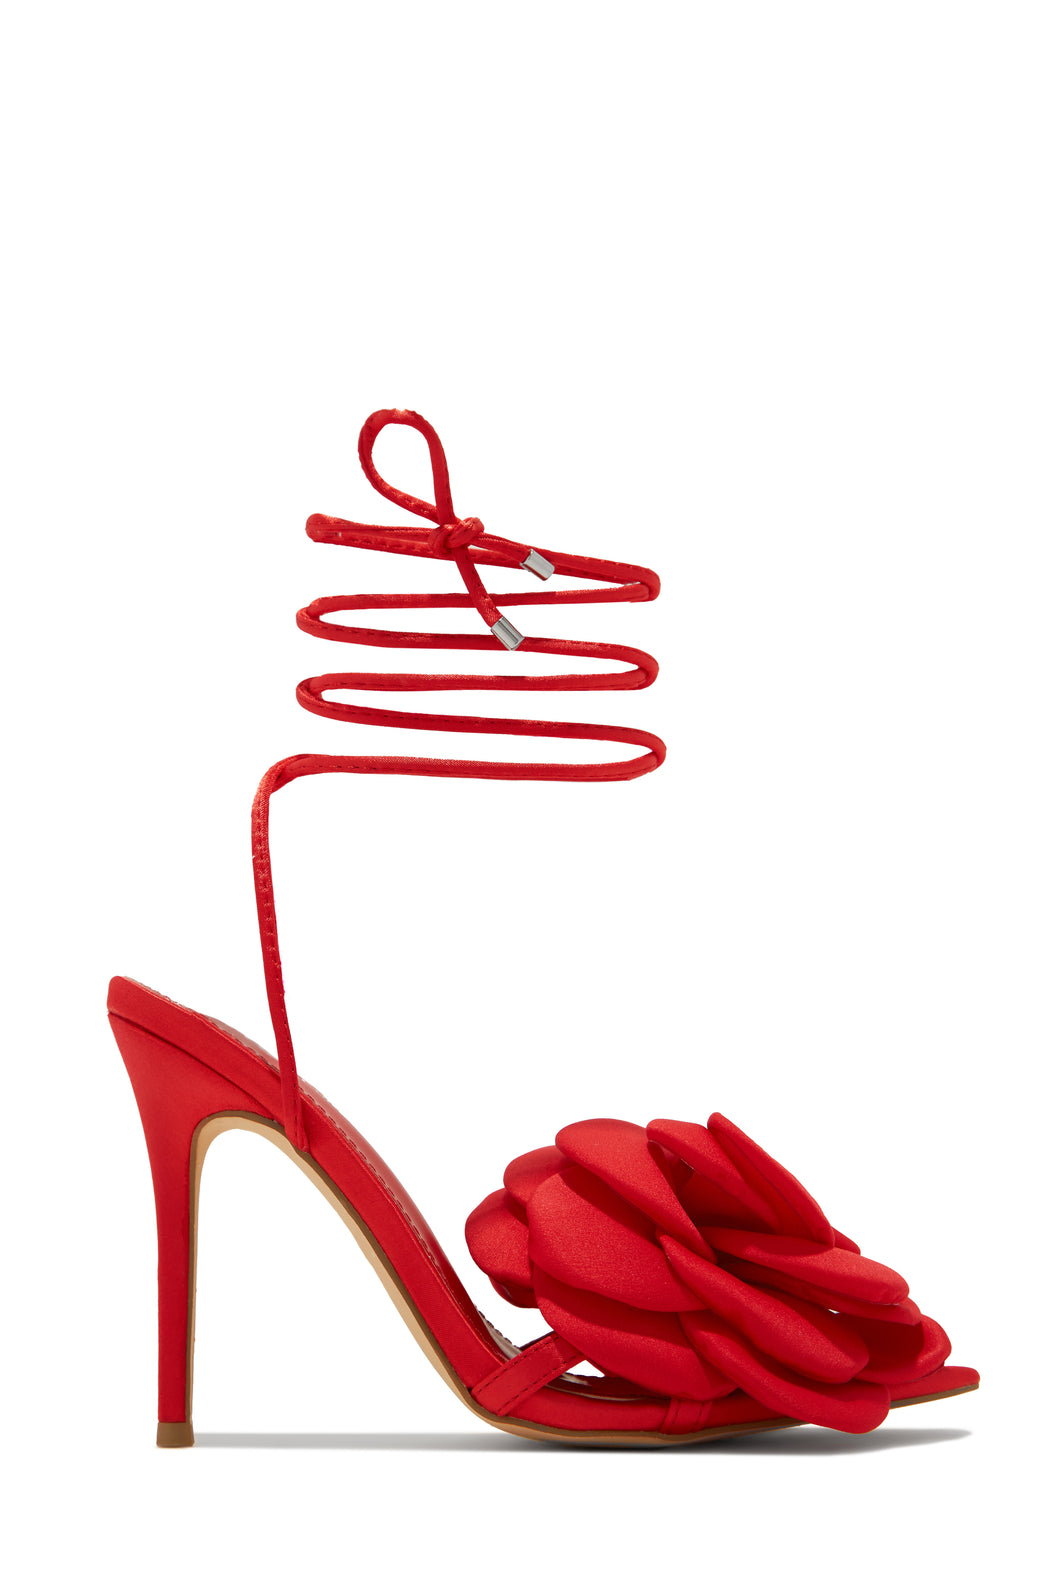 In-Bloom Floral Lace Up High Heels - Red